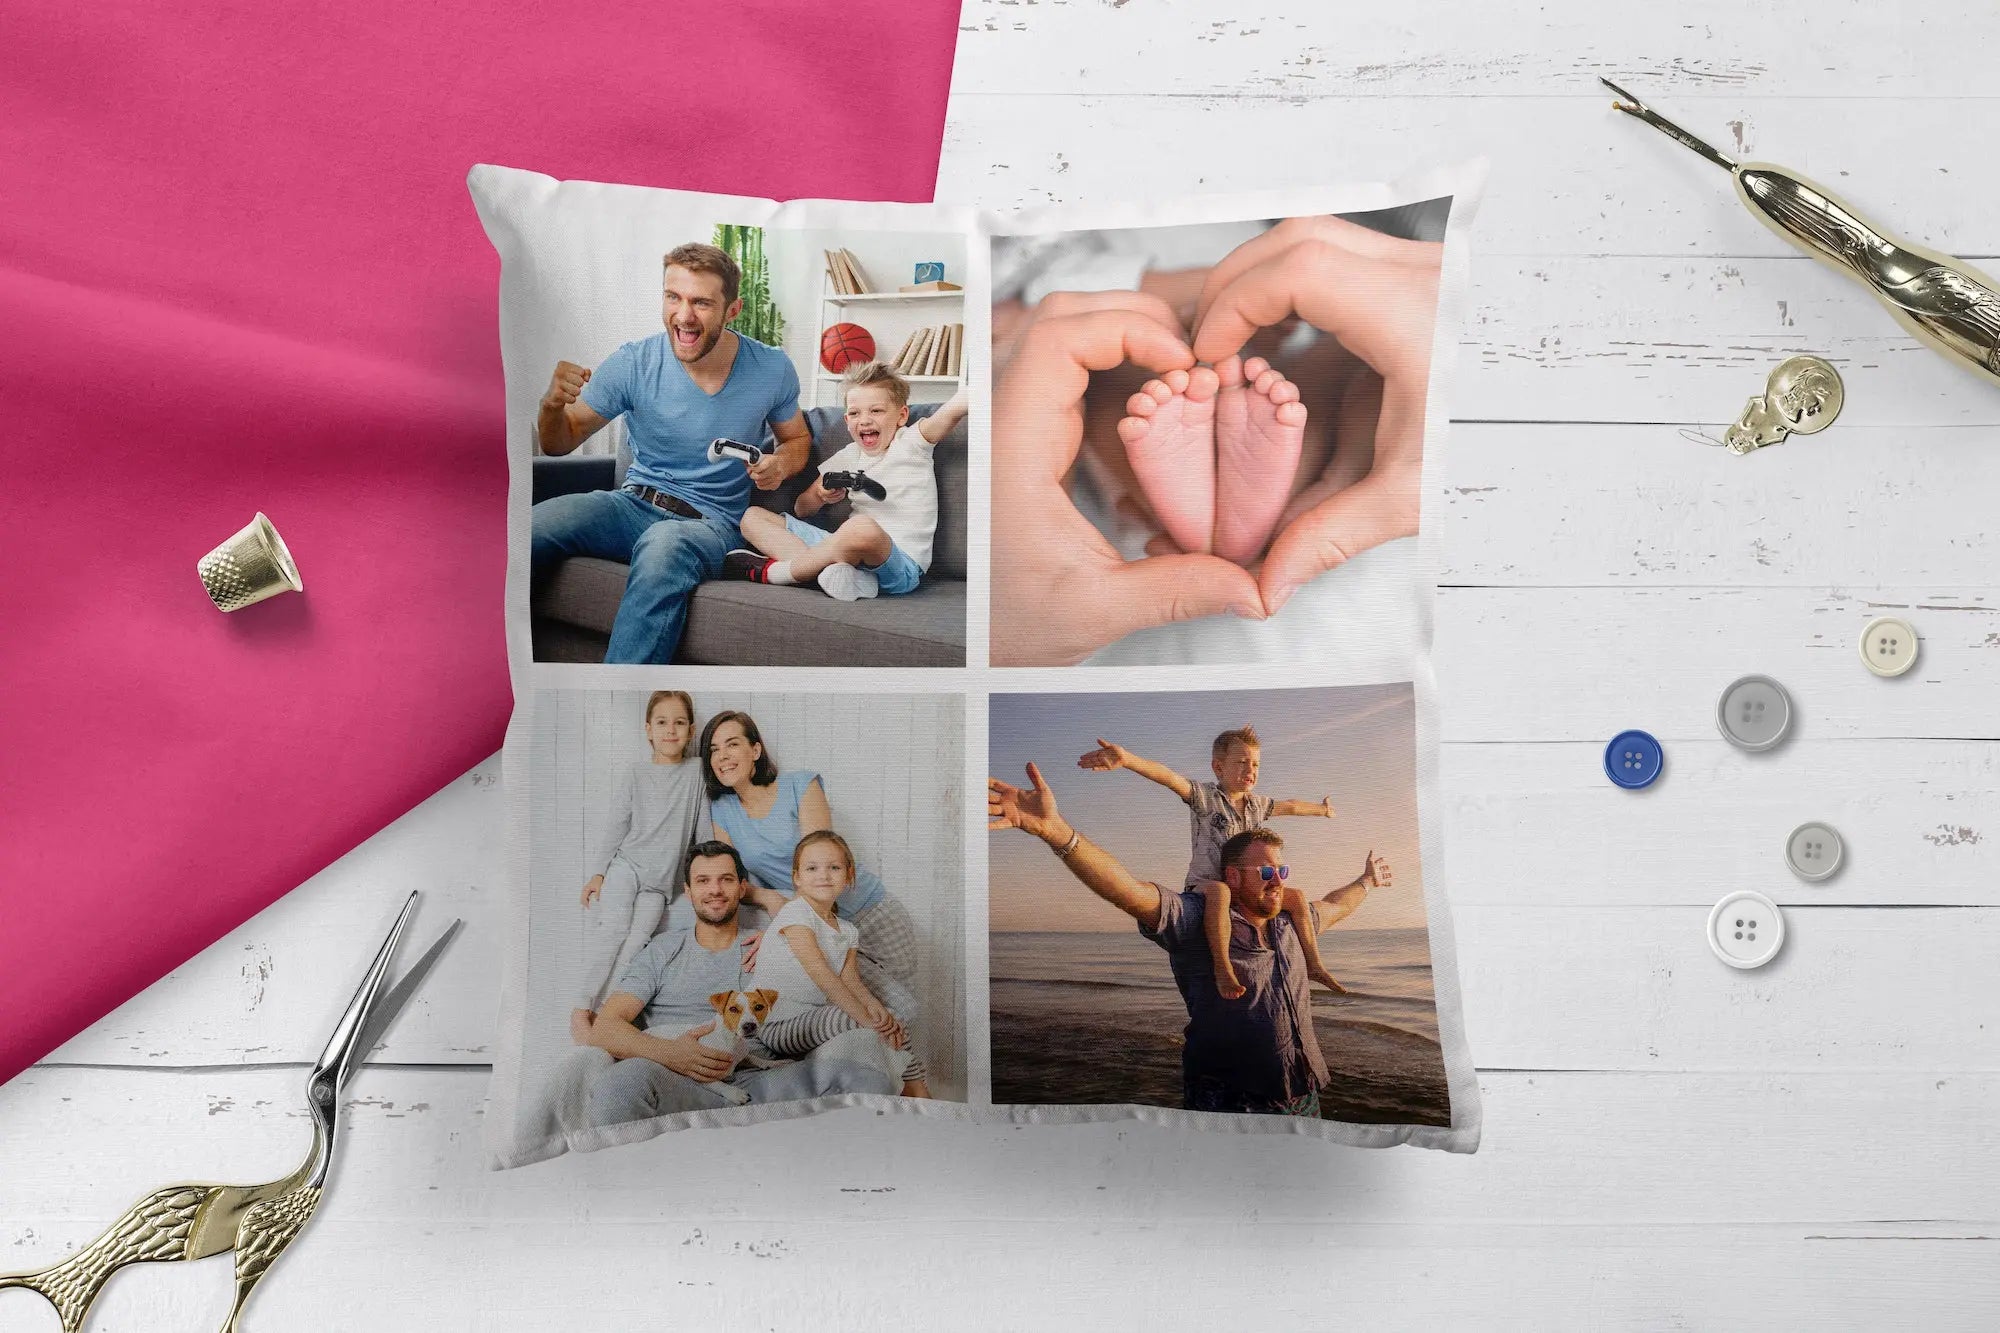 Personalised Collage Style  Cushion Cover  40x40cm  Photo Cushion - 4 Images